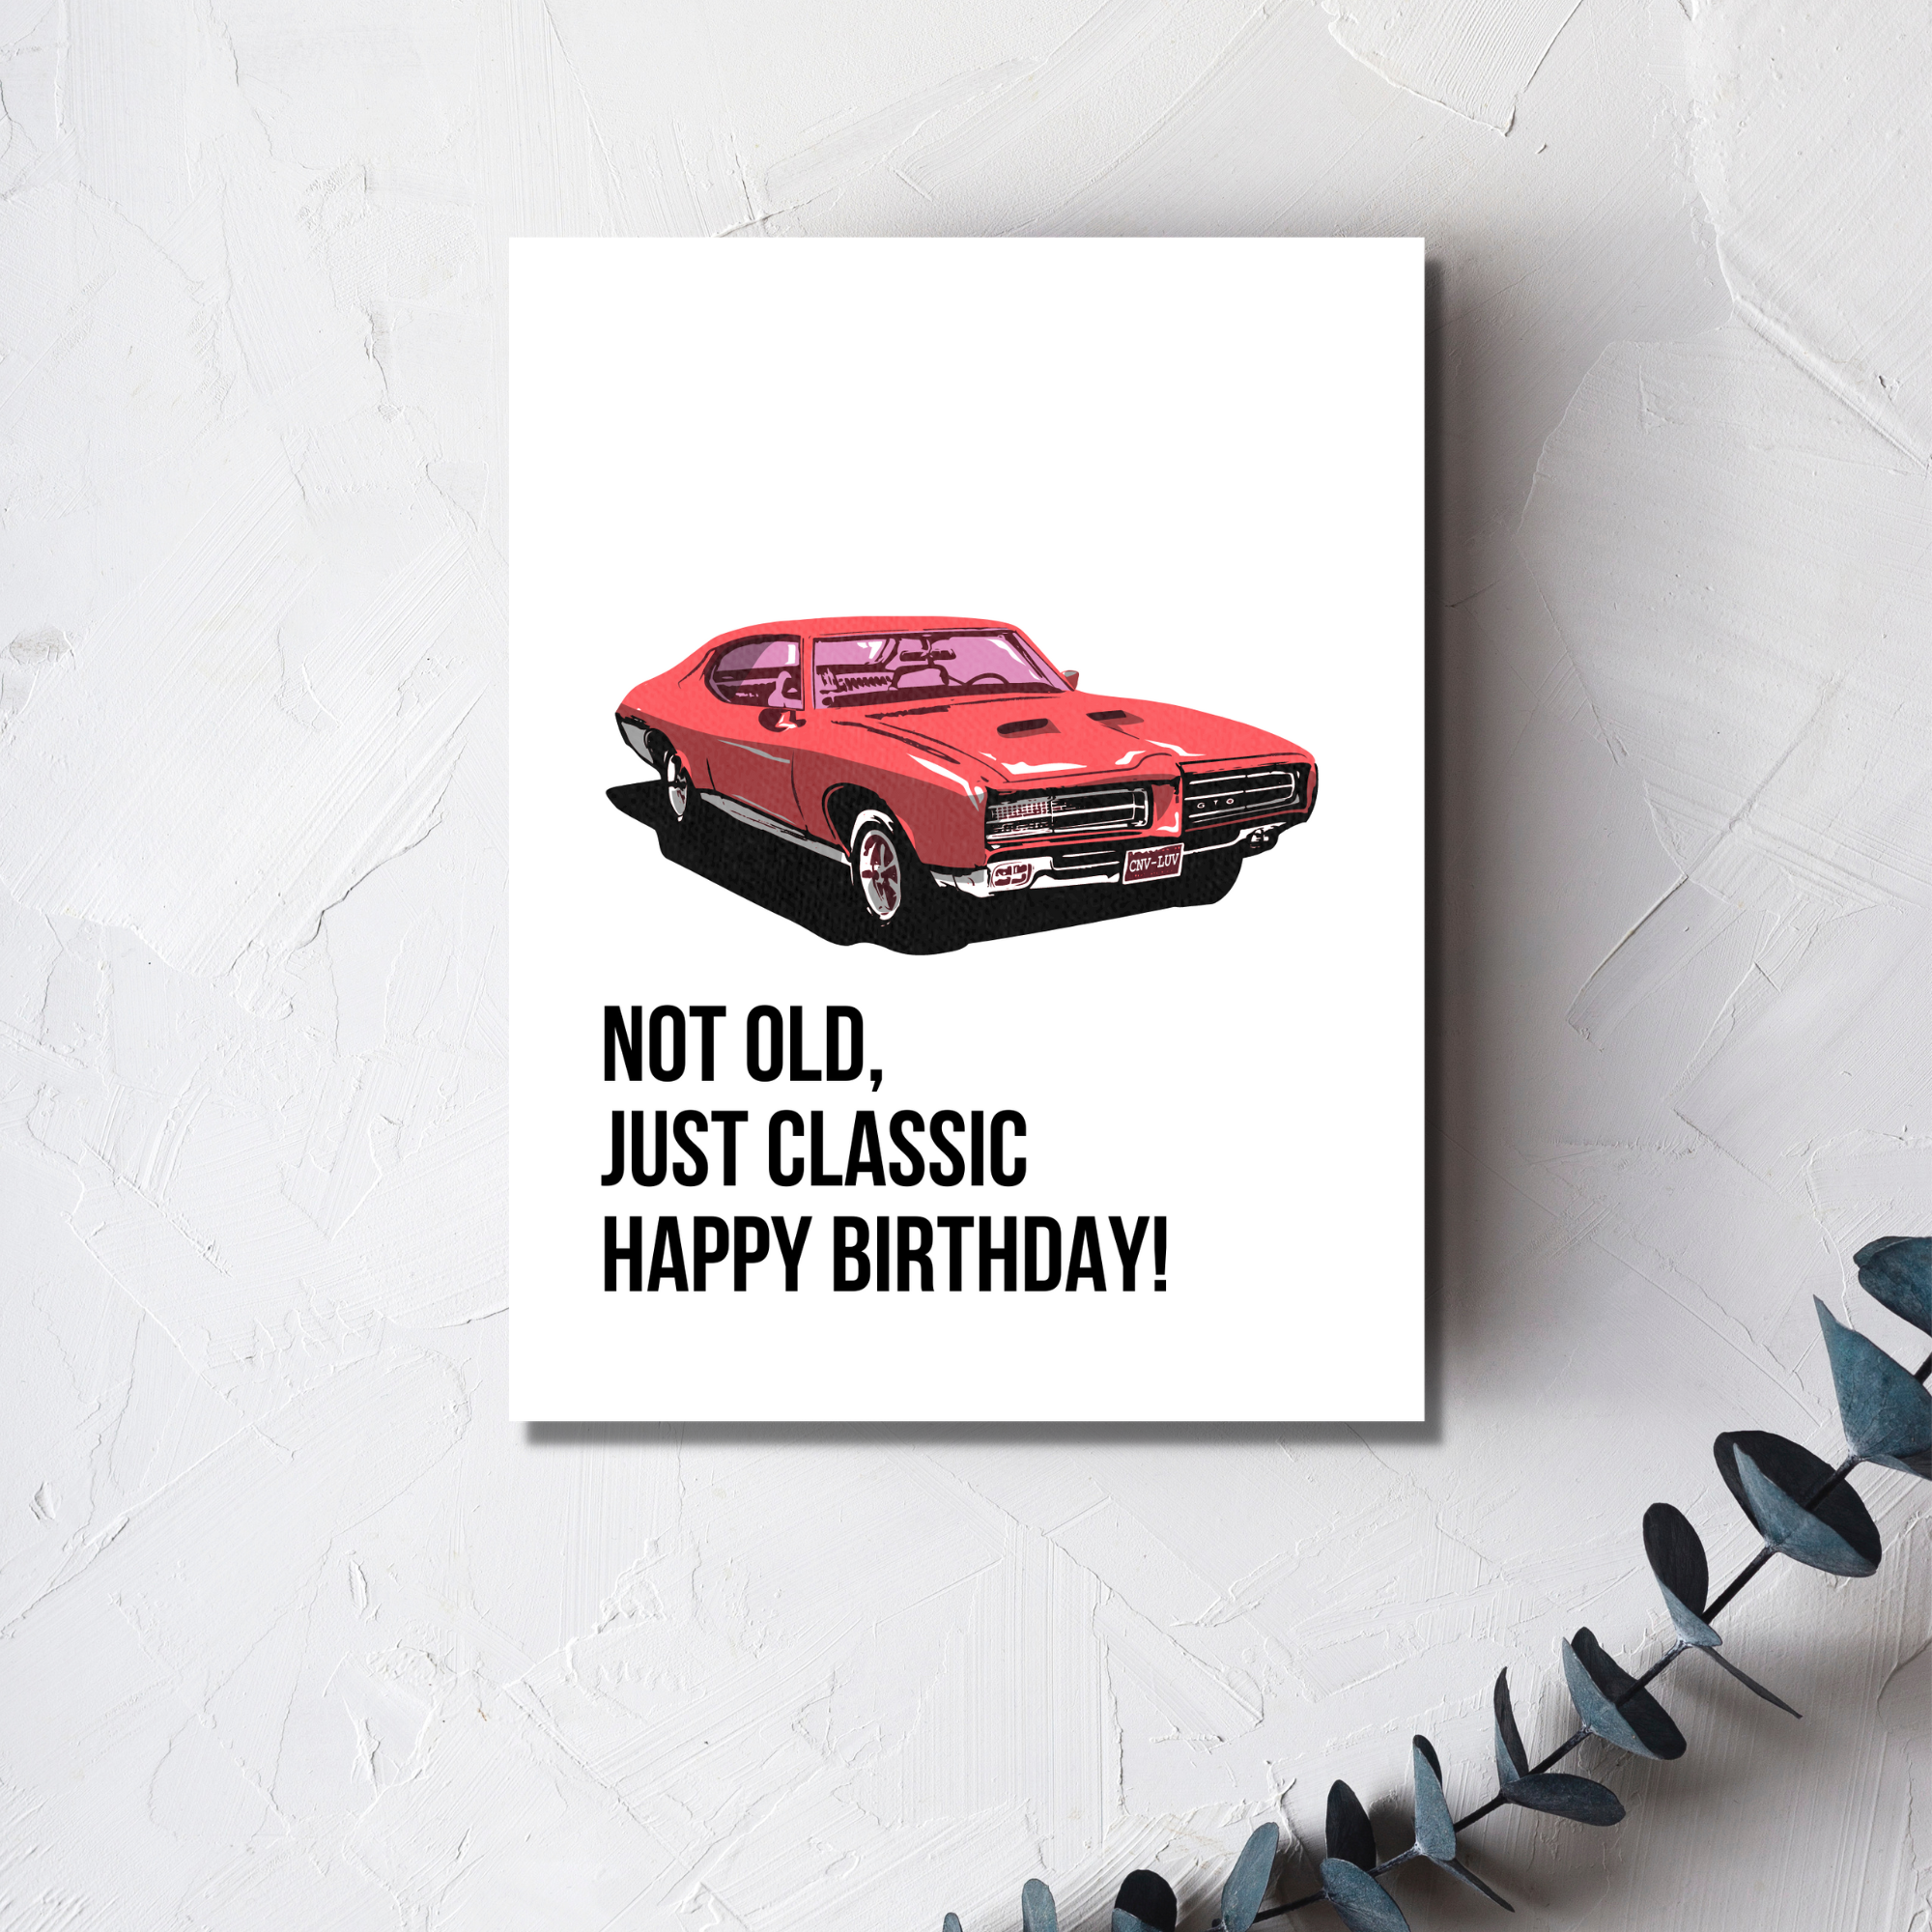 Just Classic - Throwback Birthday Cards (4 Styles)